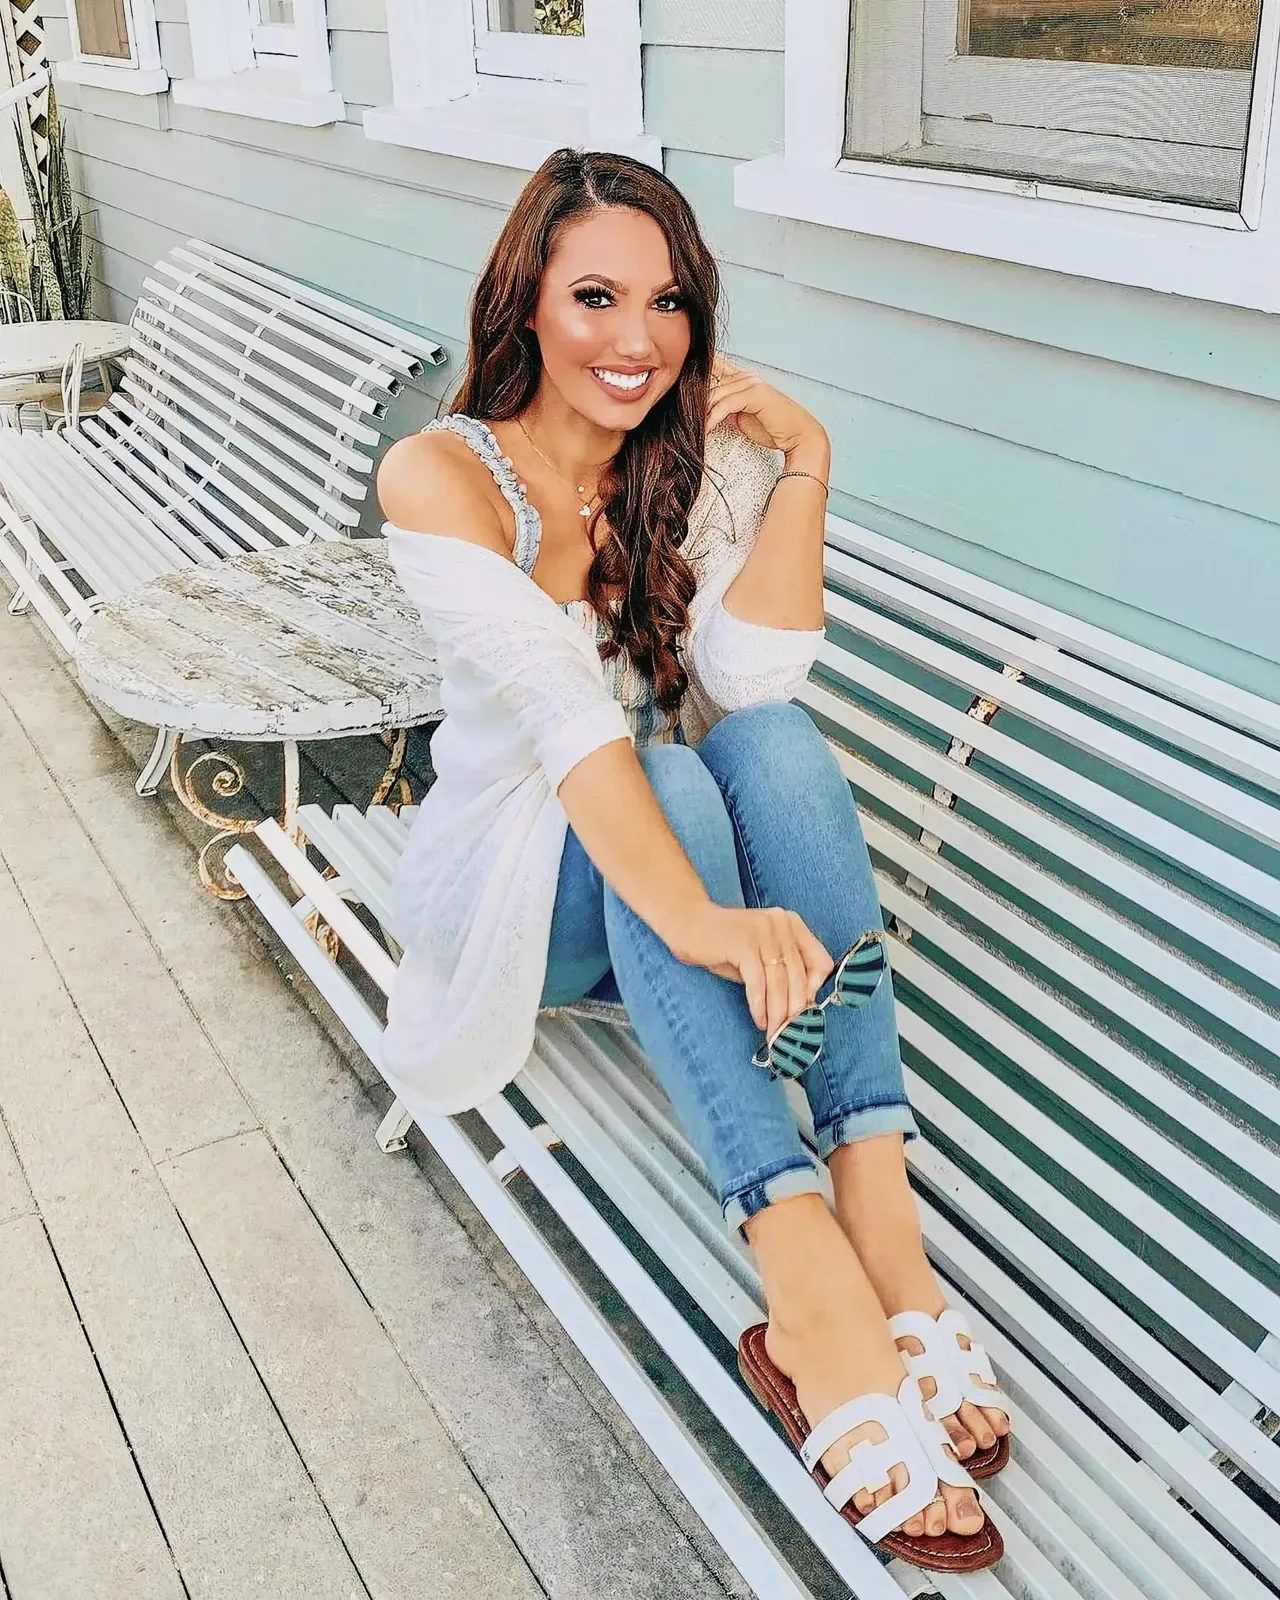 Woman sitting on a wooden bench wearing stylish Sam Edelman leather sandals.